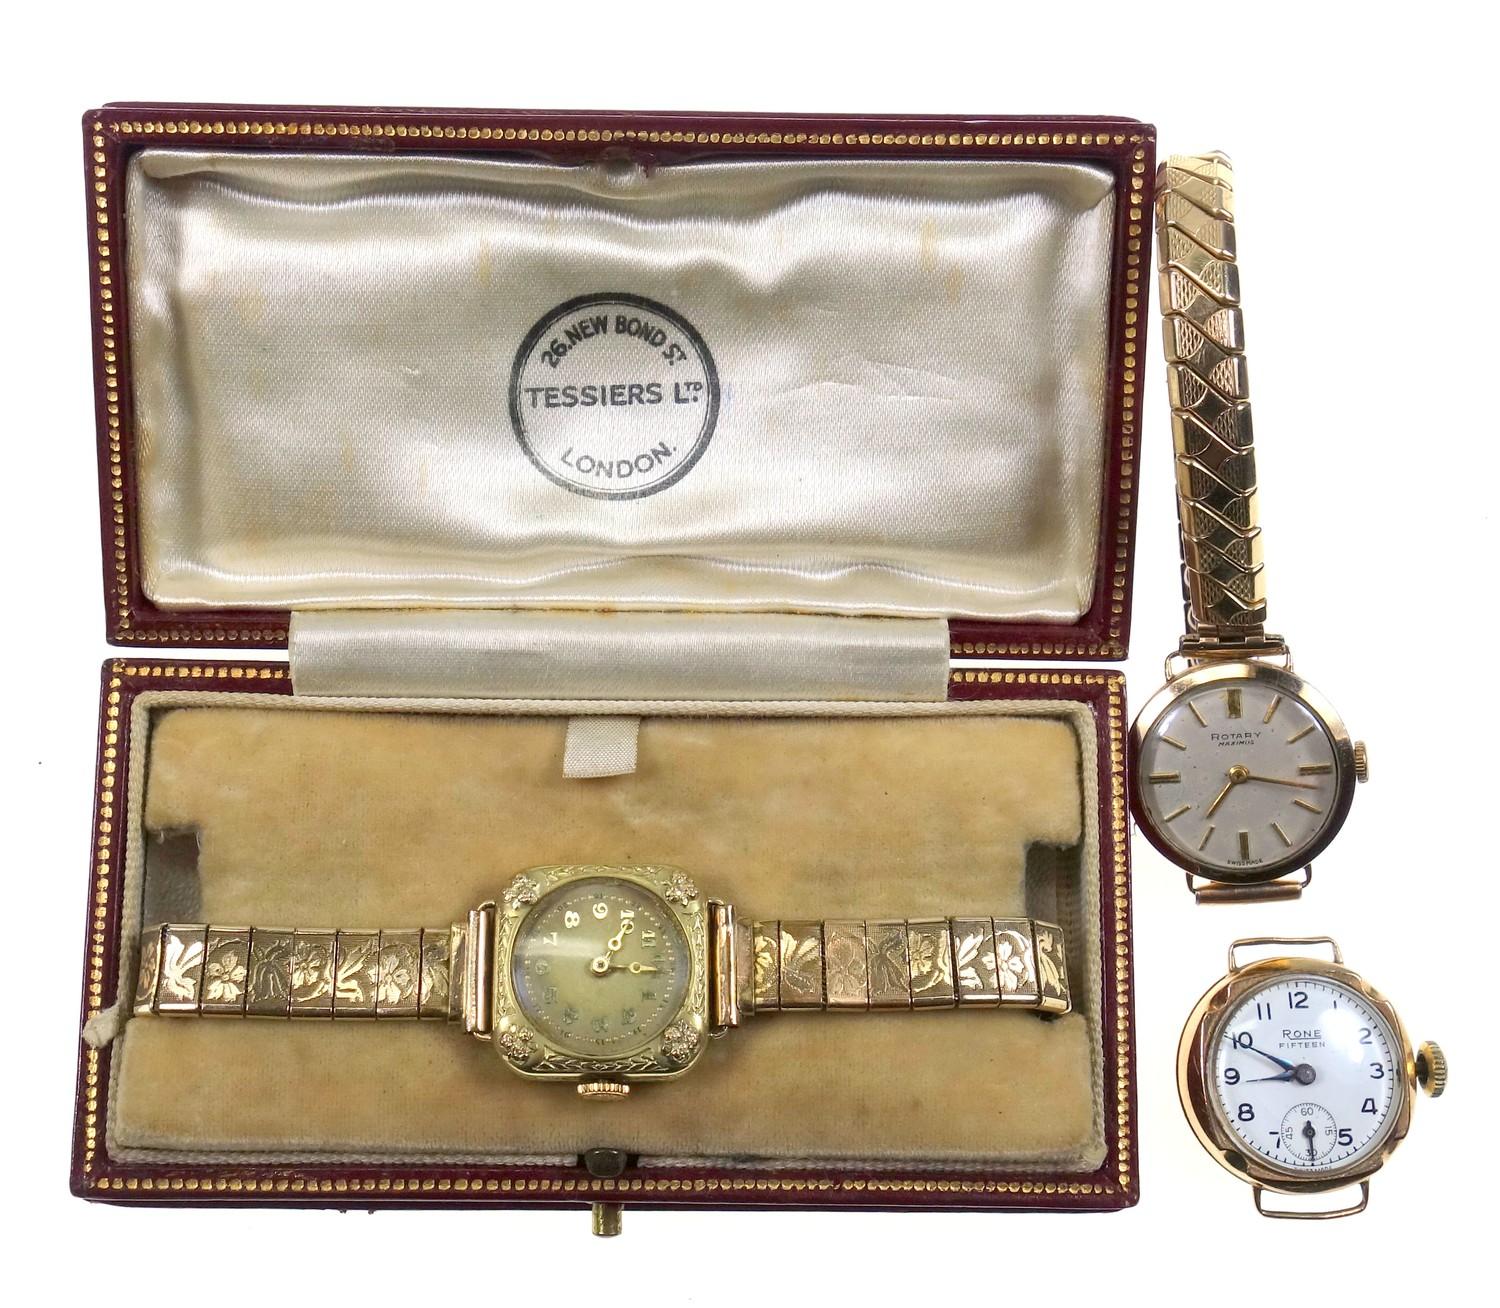 Edwardian ladies gold watch, the case with raised floral decoration and engraved sides, 14 ct, on